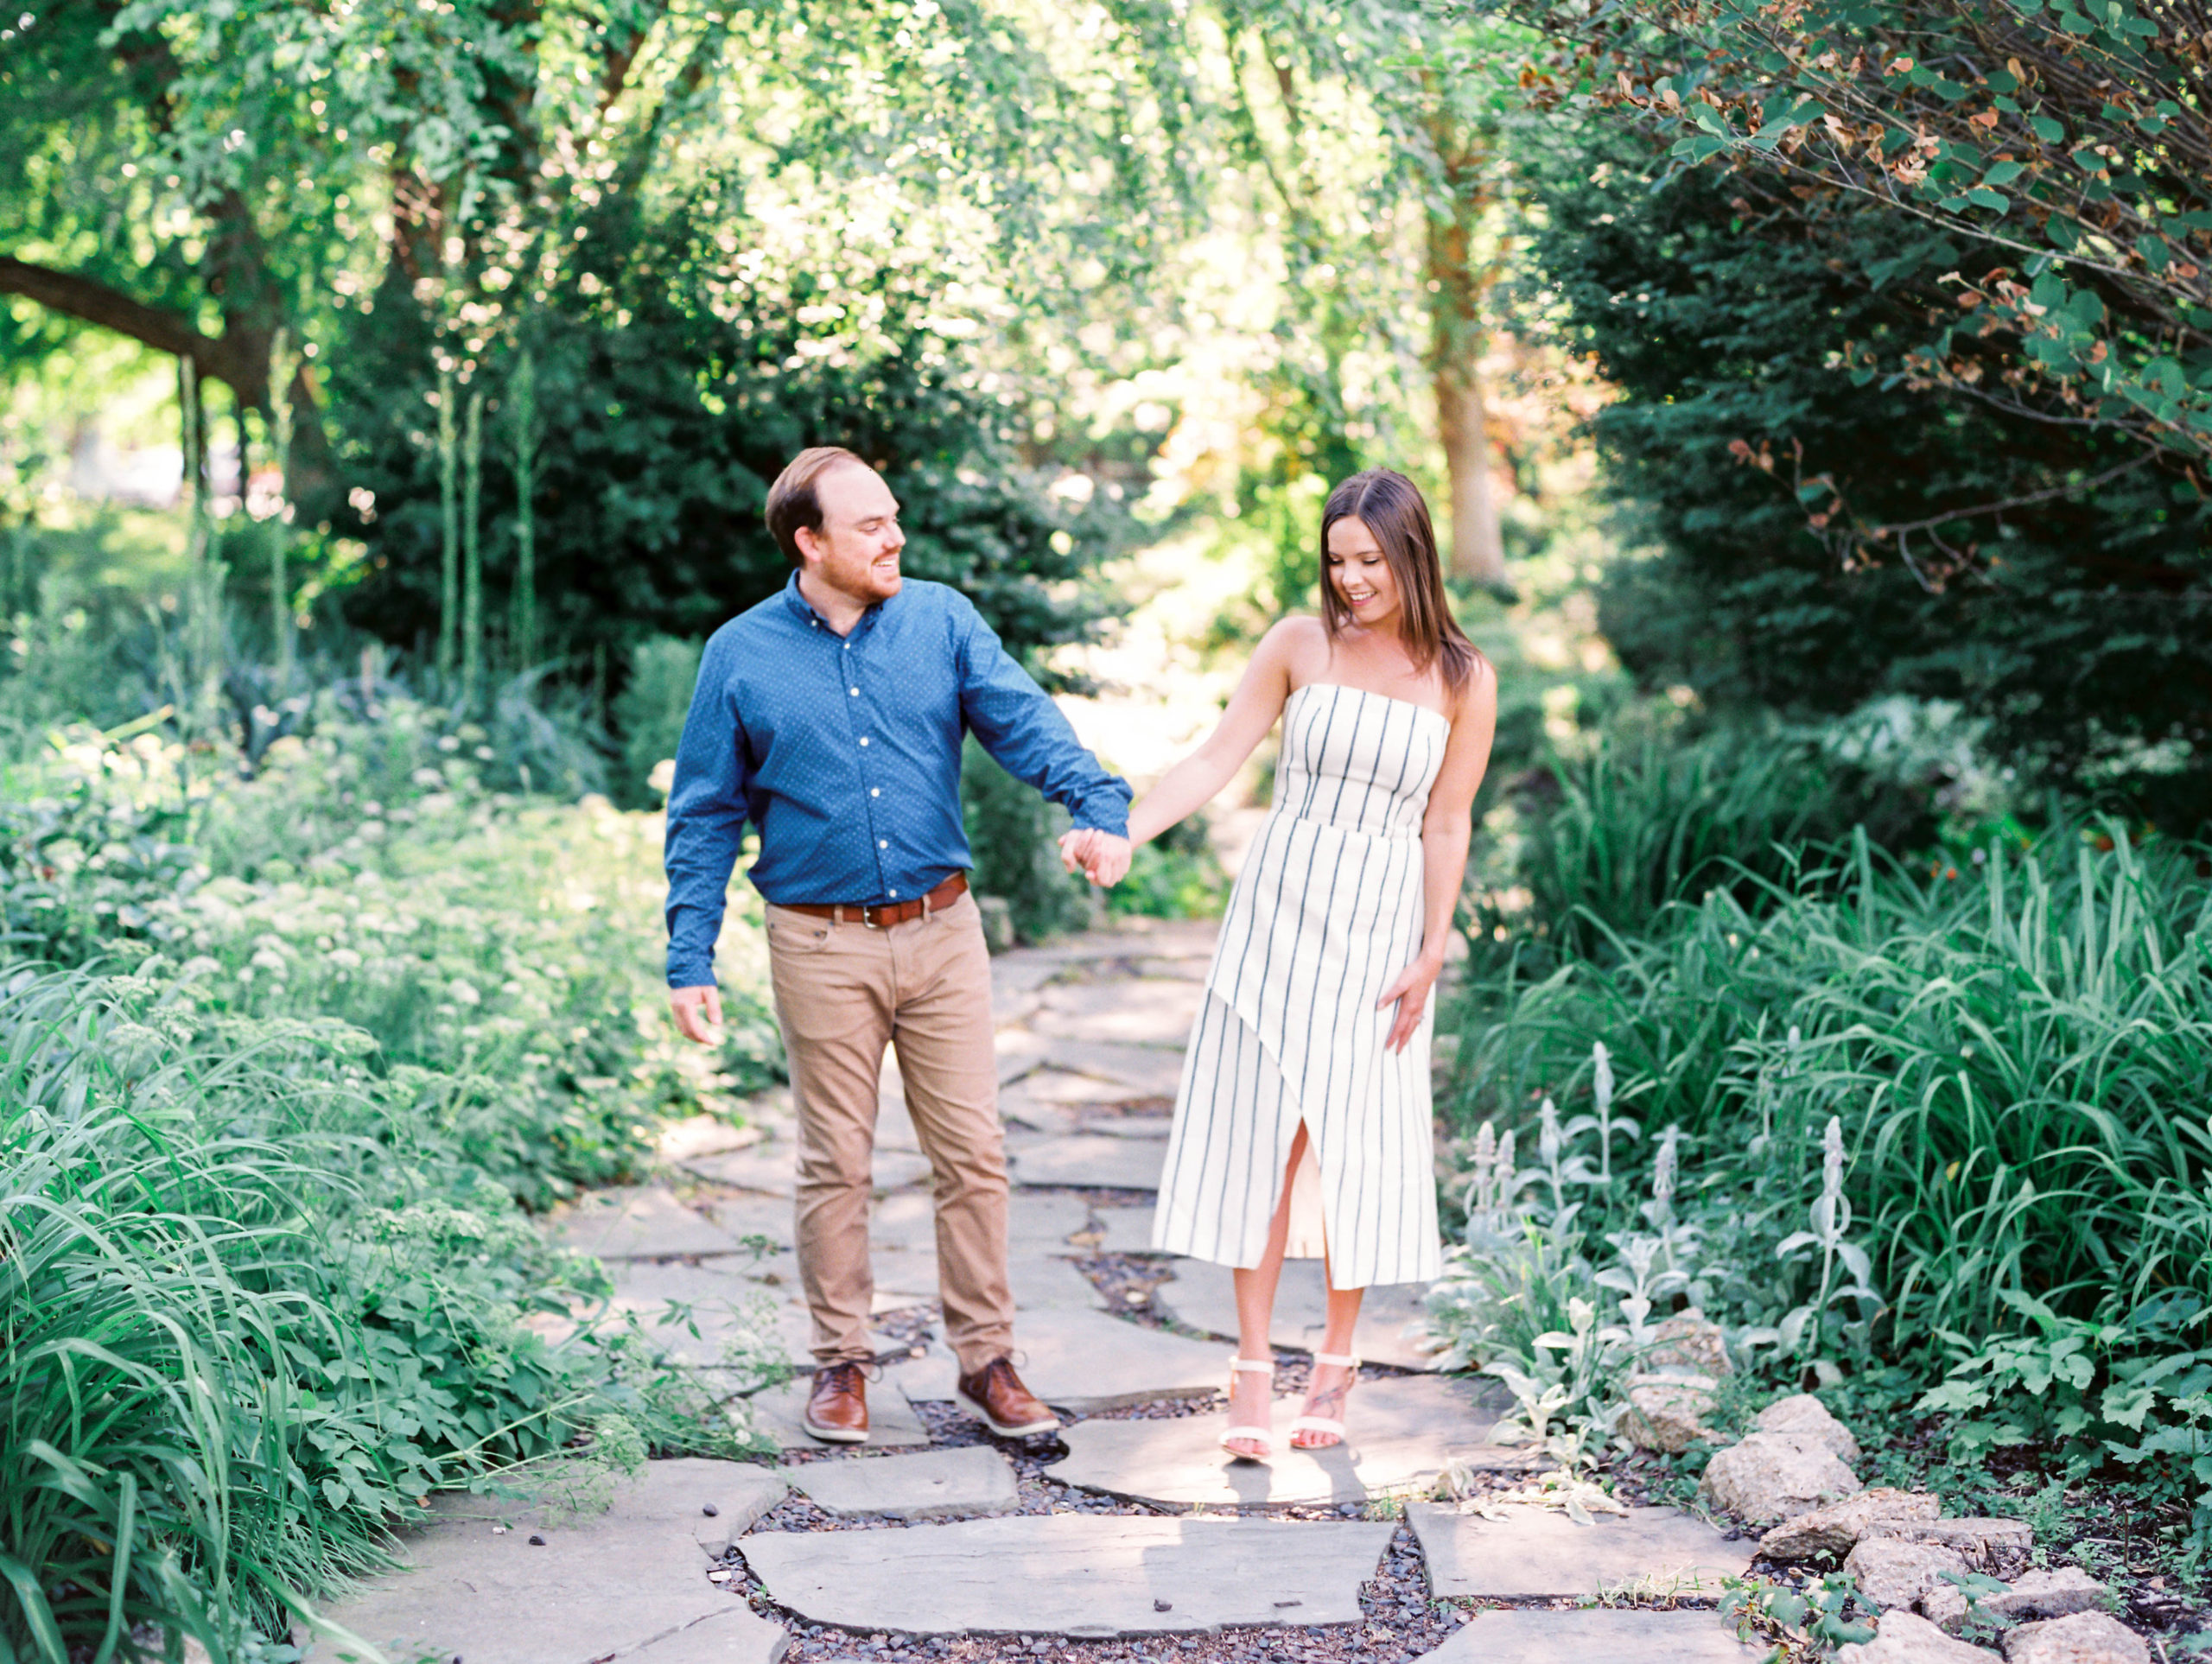 Spring/summer engagement session outfit guide